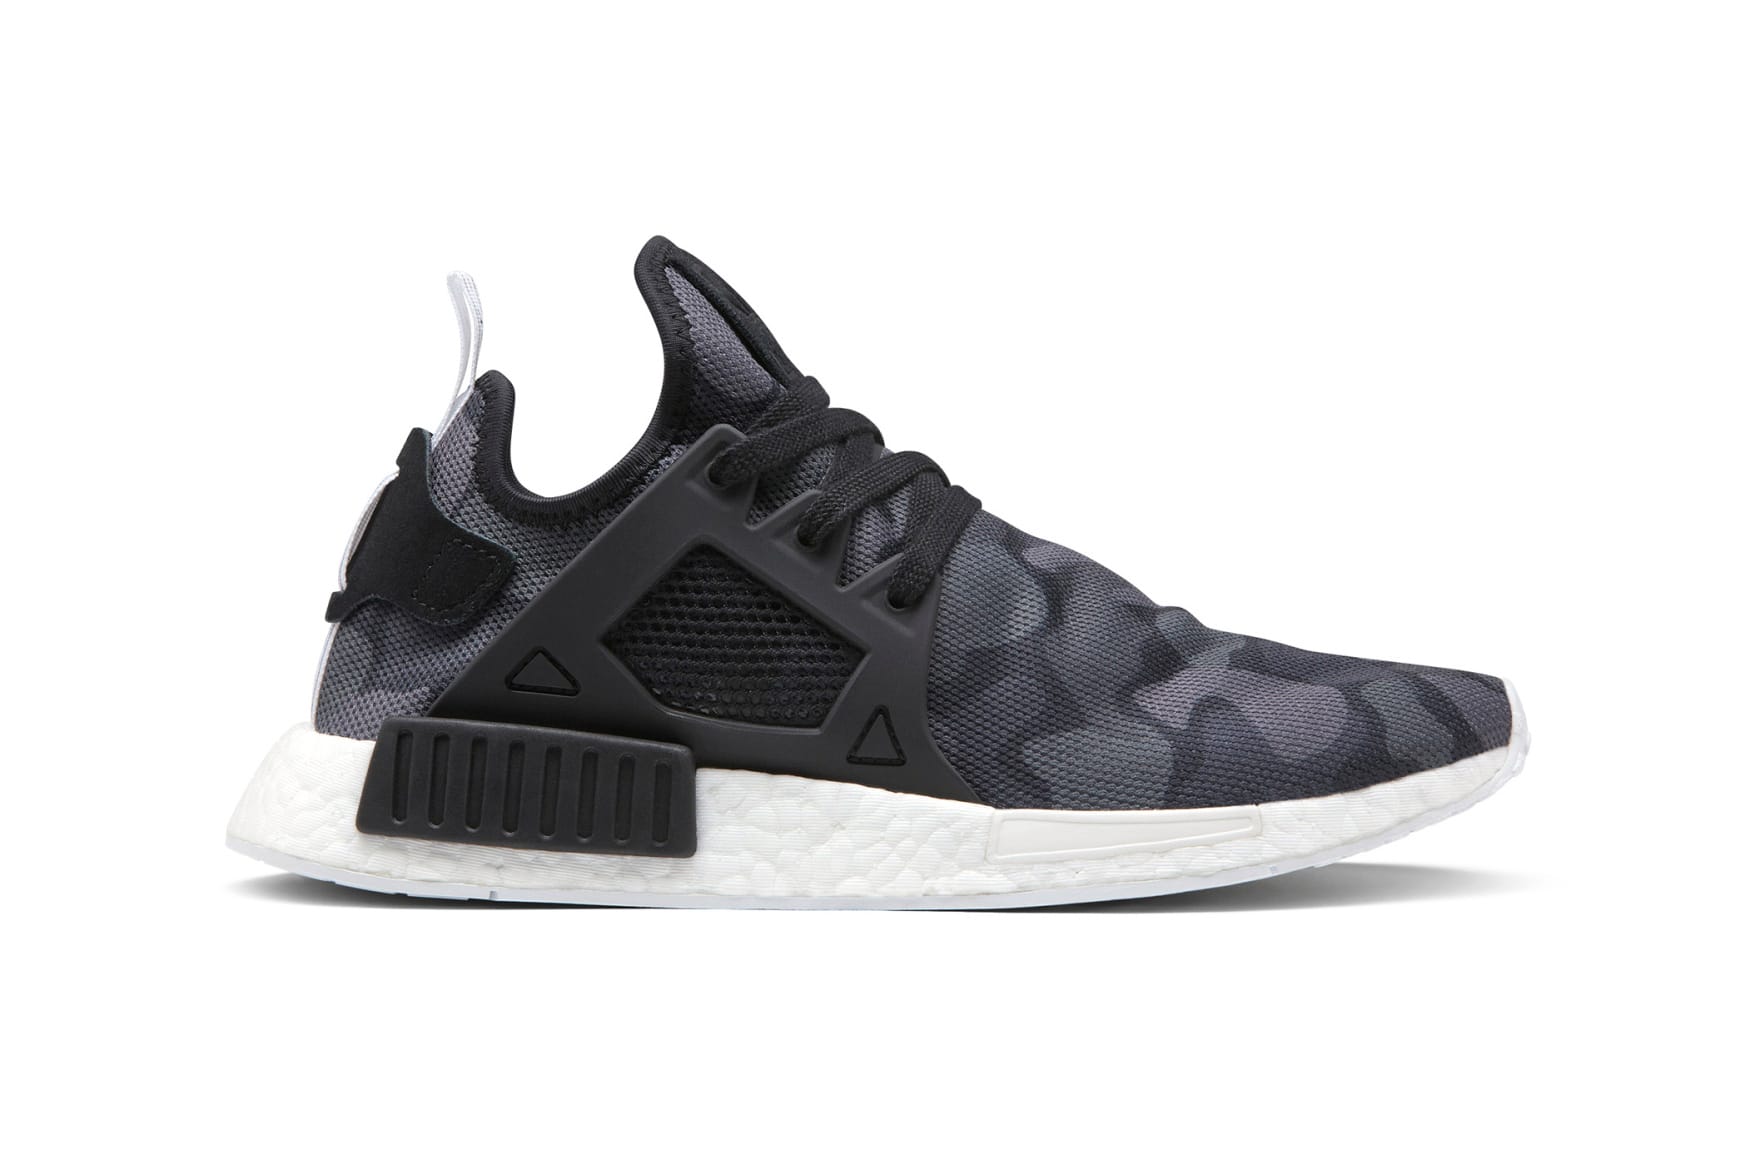 These adidas NMD R1 \u0026 XR1s Just 